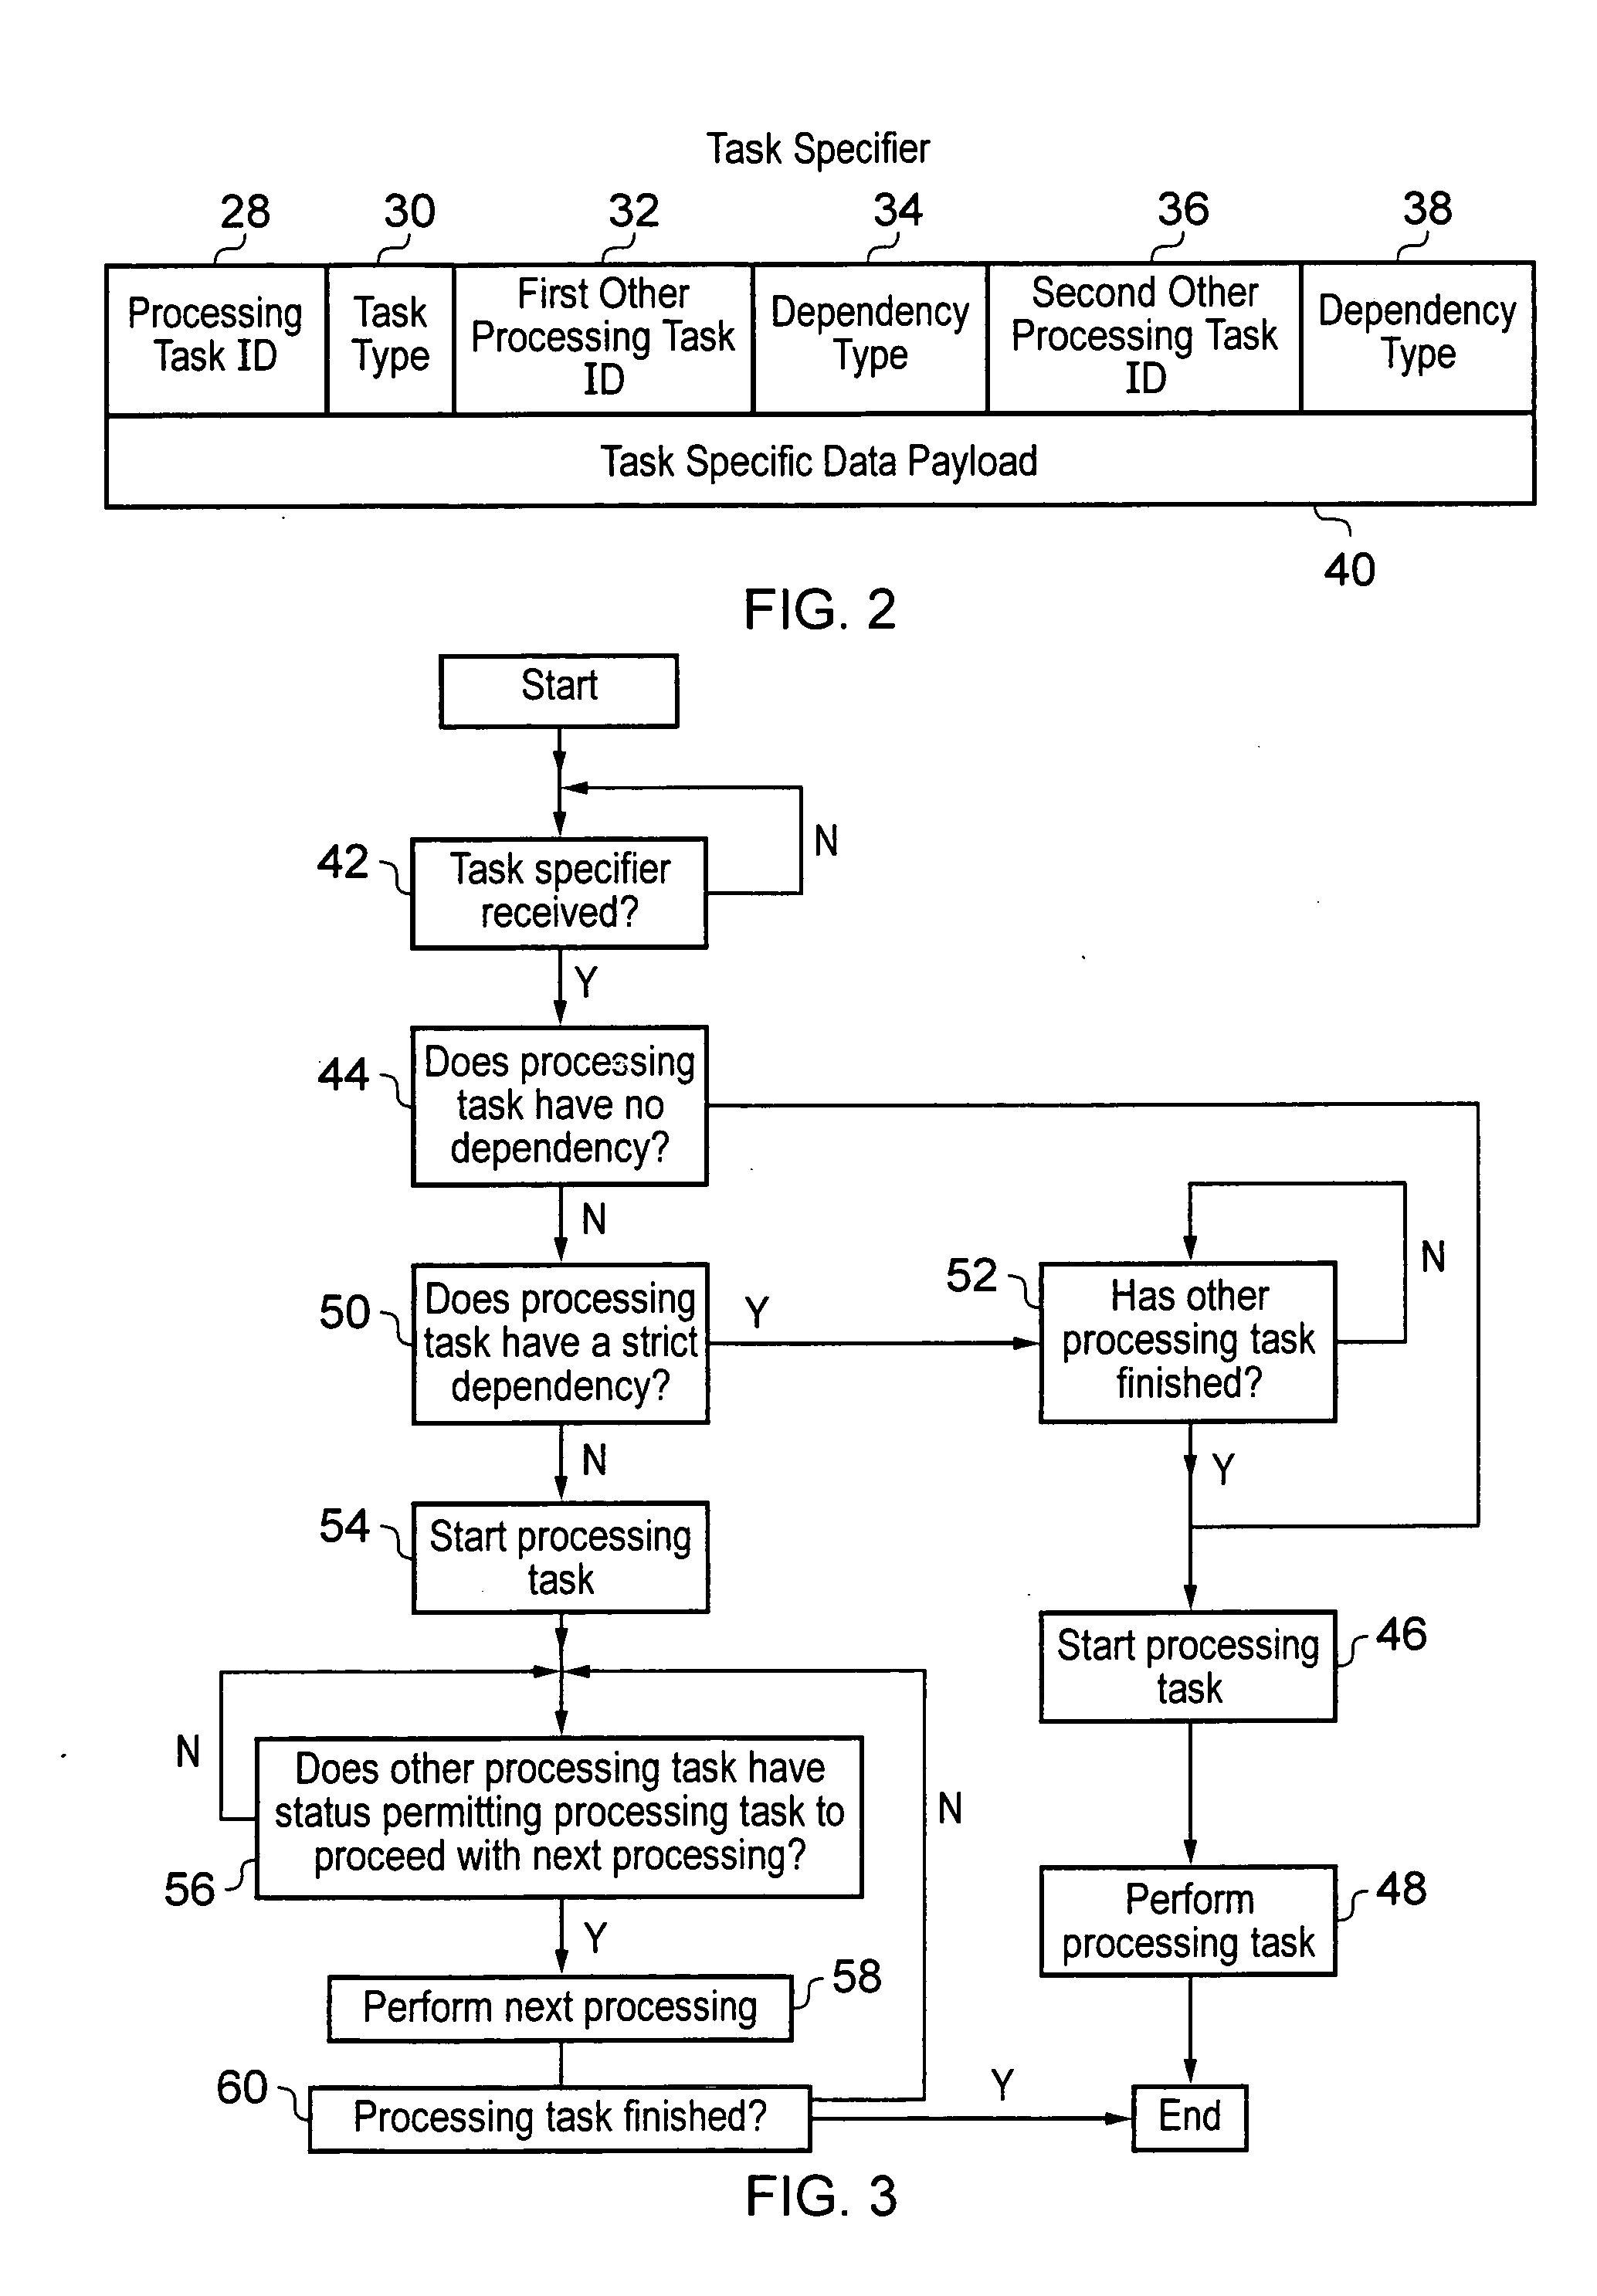 Managing task dependency within a data processing system